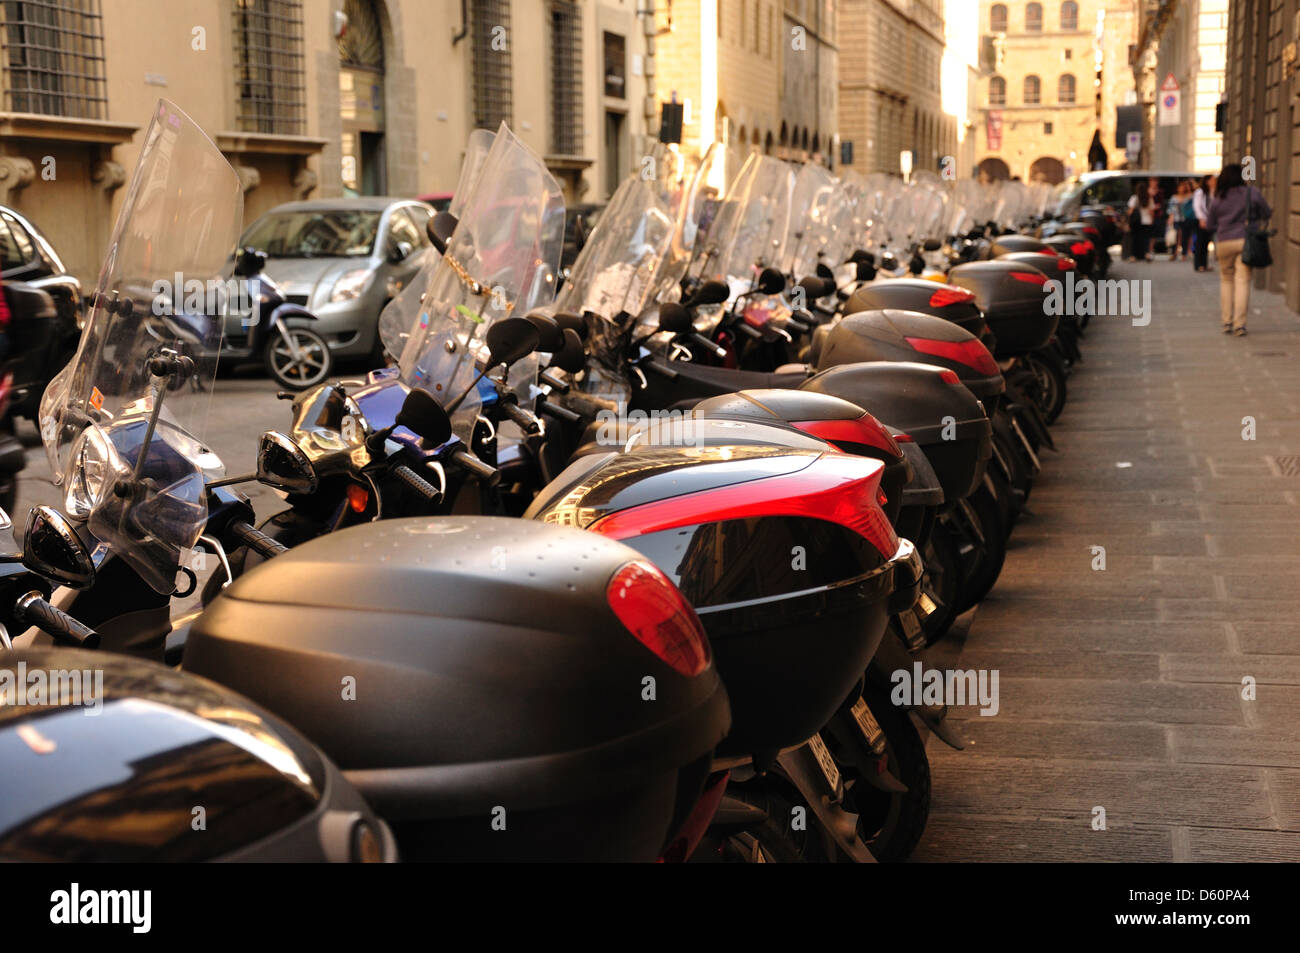 Scooters parked in Rome Italy side street. Scooter storage box,straight line,roadside parking Stock Photo